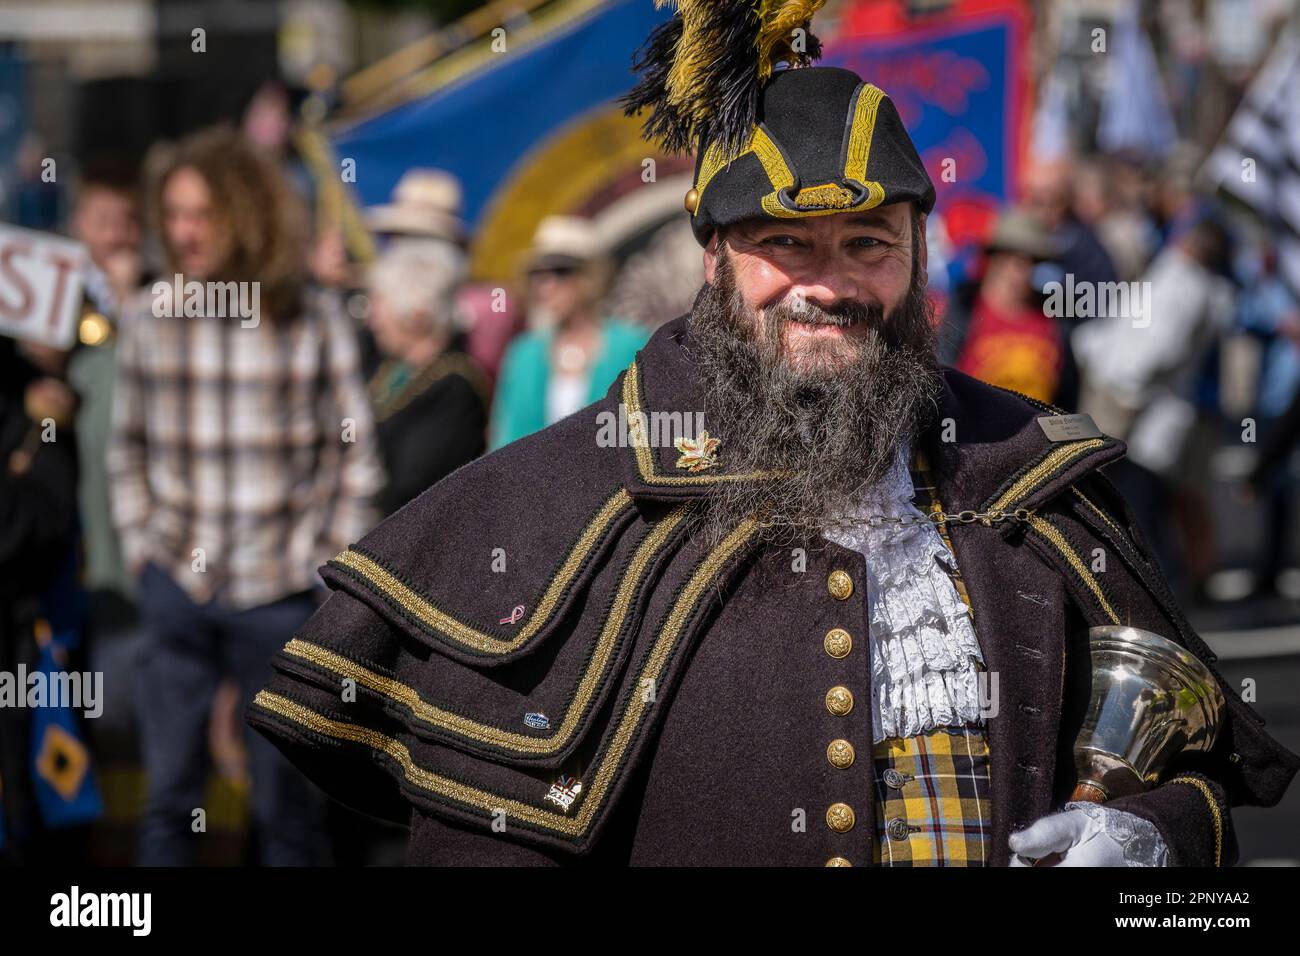 A smiling Philip Northcott the official Penzance Pensans Town Crier in full regalia and carrying his handbell in Cornwall in the UK. Stock Photo